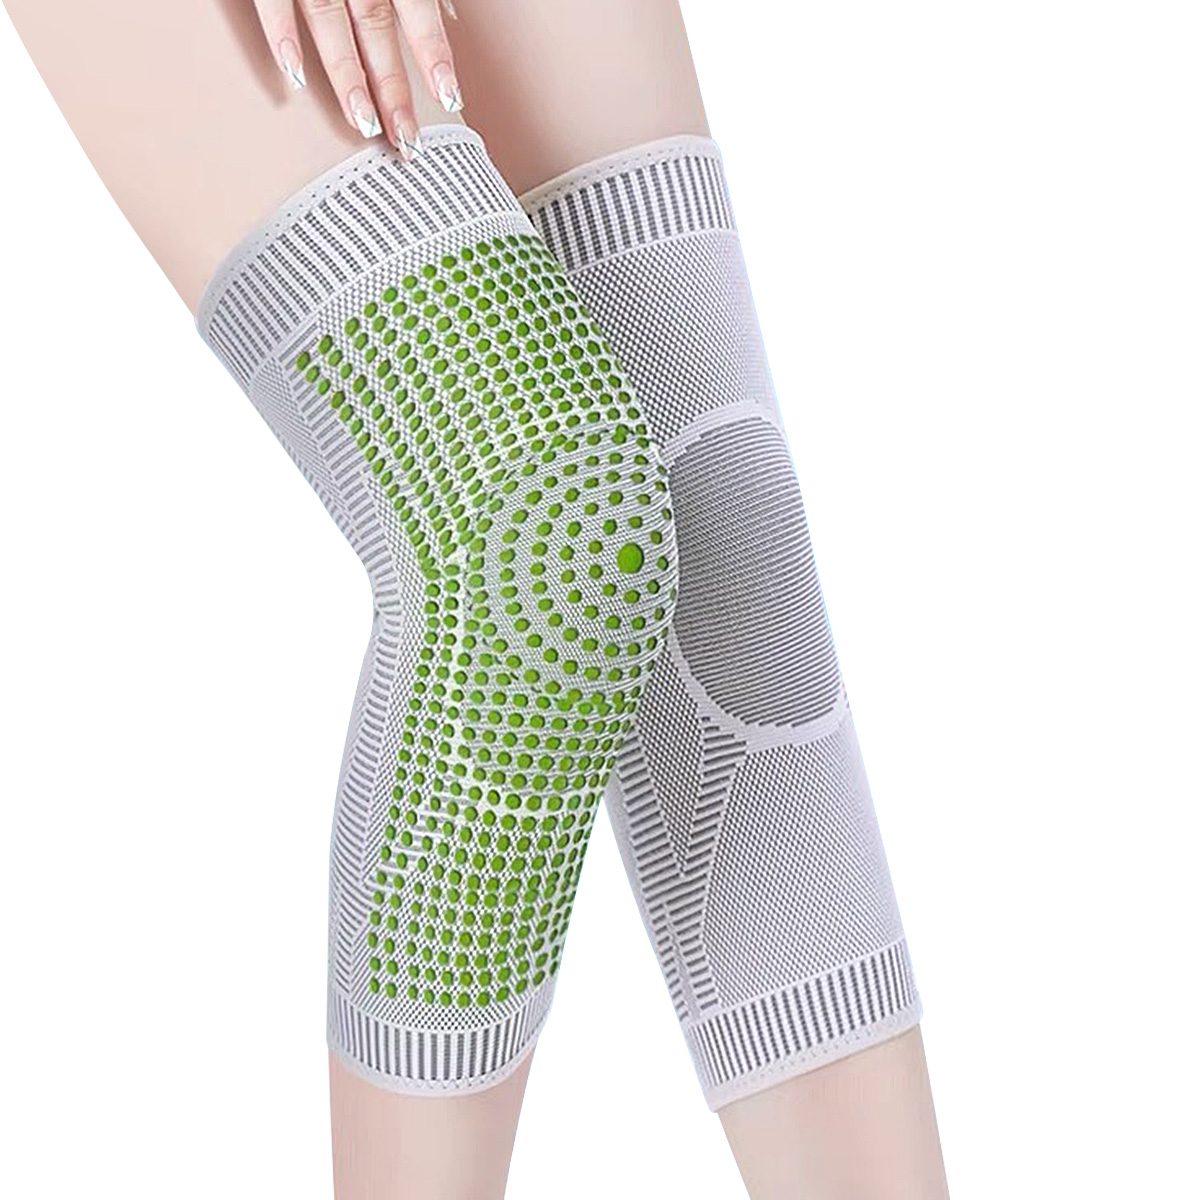 Knitting Warm Compression Medical Knee Support